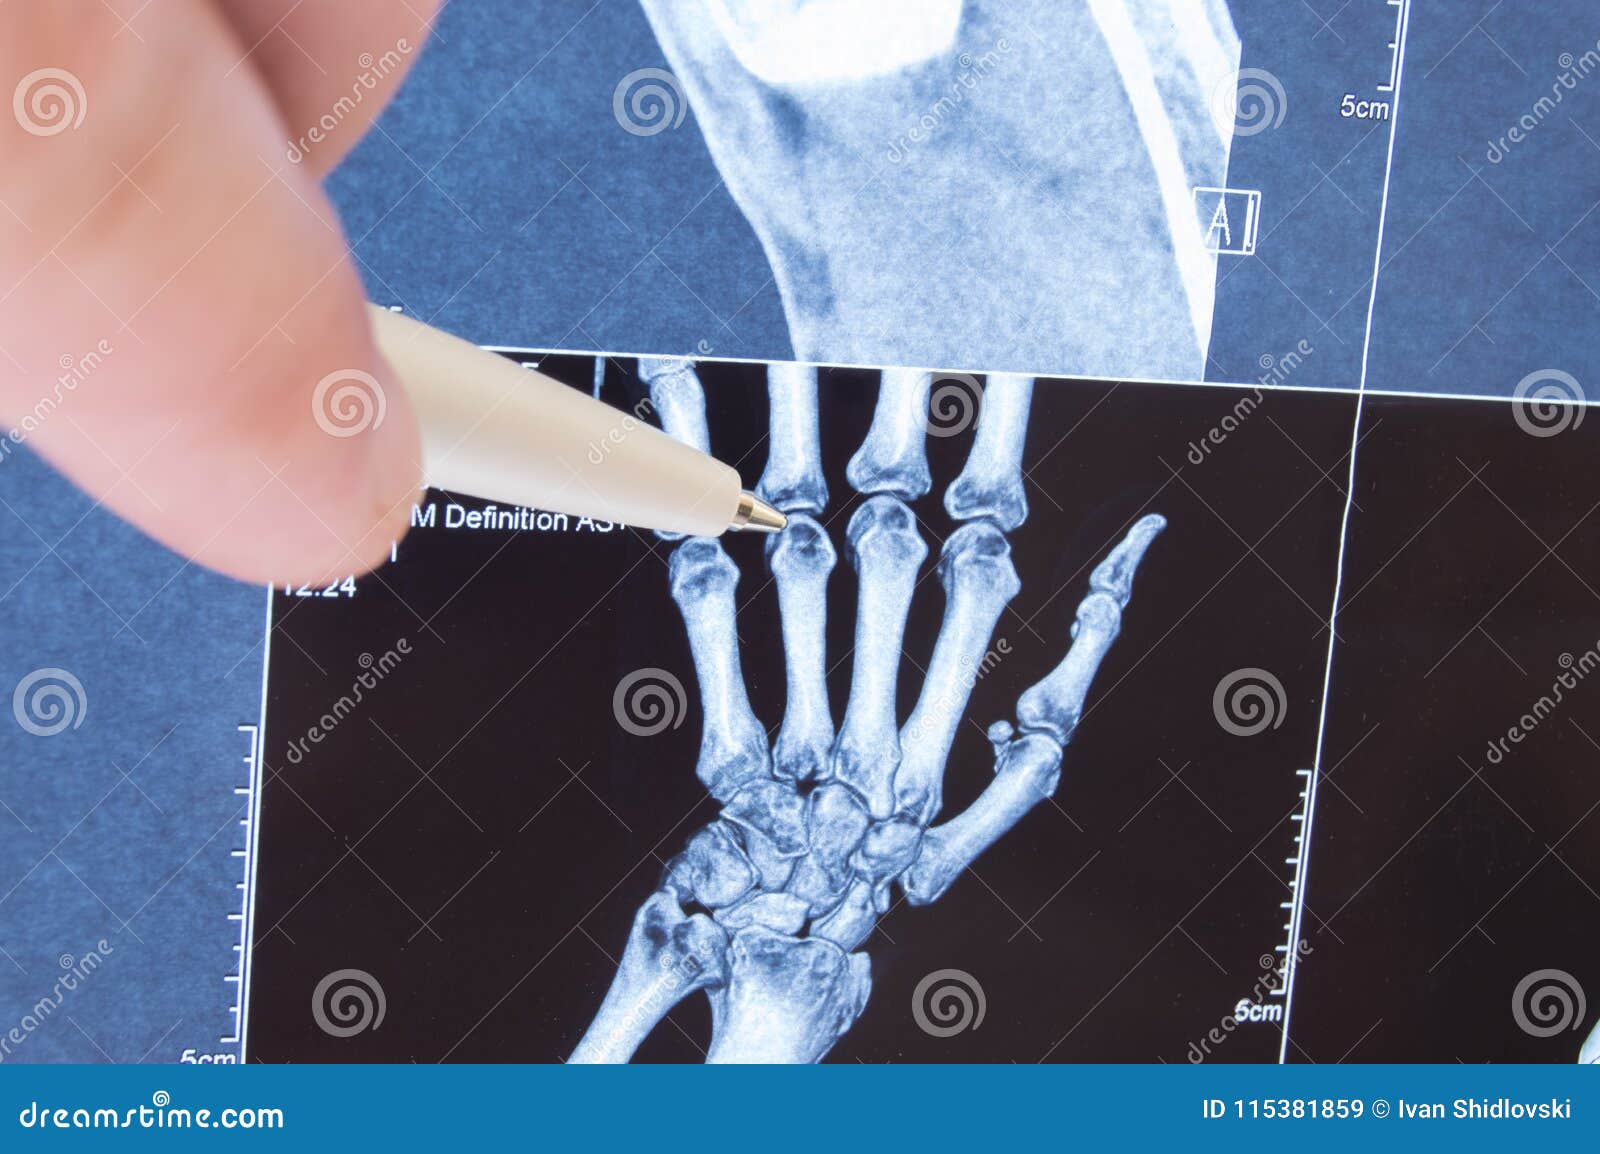 x-ray scan of hand, bones and finger joints. doctor pointed on finger small joints, where pathology is detected, such as arthritis